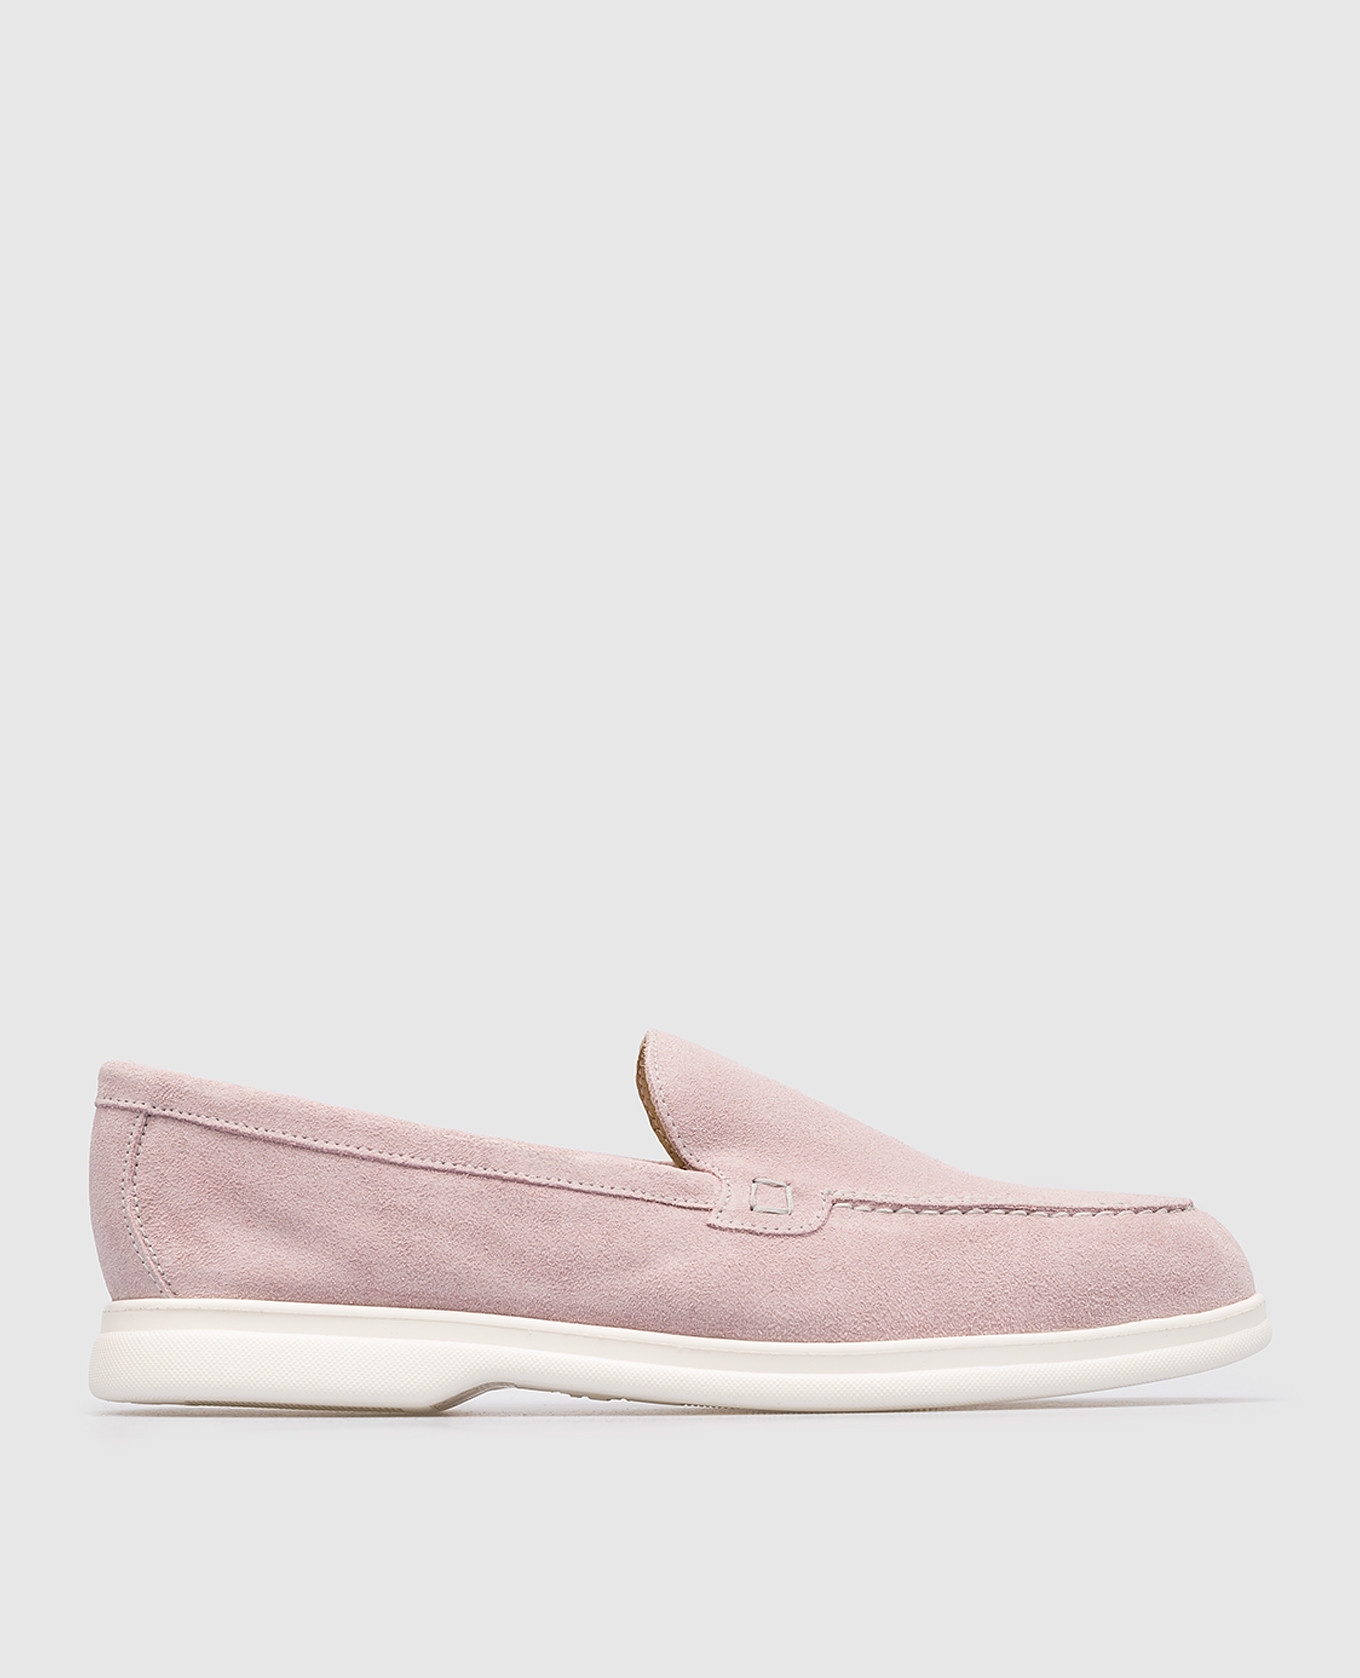 Pink suede slippers